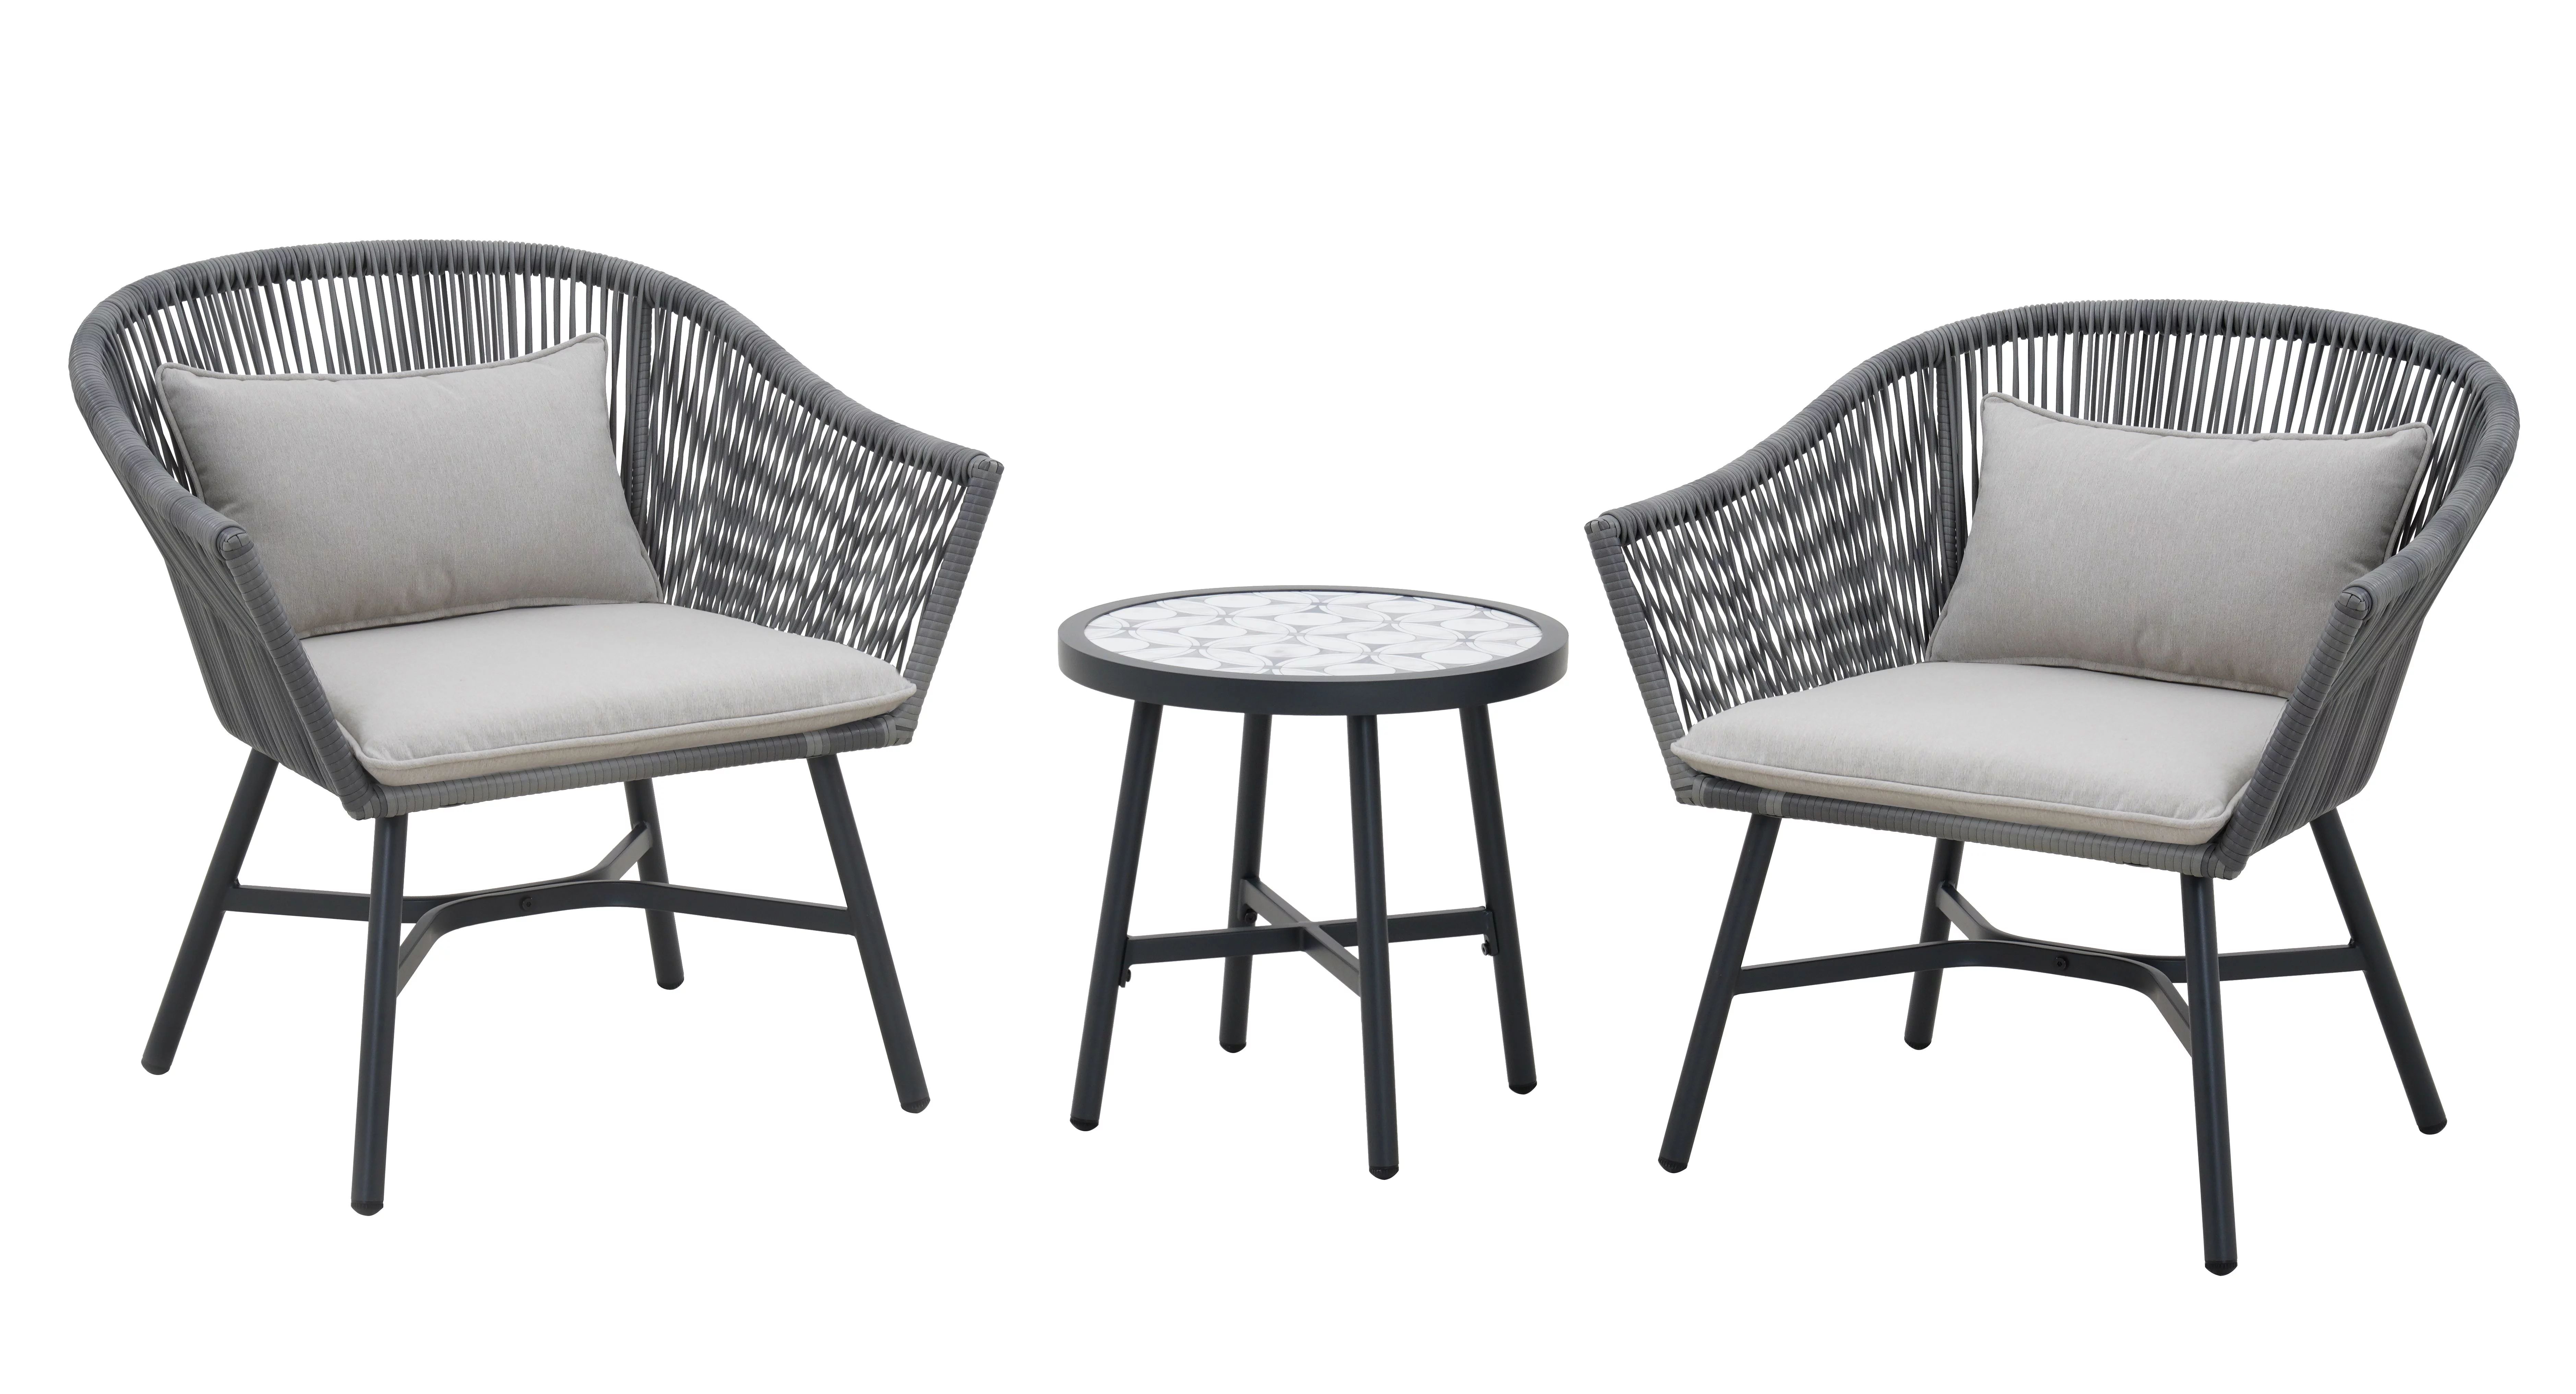 Better Homes & Gardens Blakely 3-Piece Chat Set with Tile Top Table, Gray | Walmart (US)